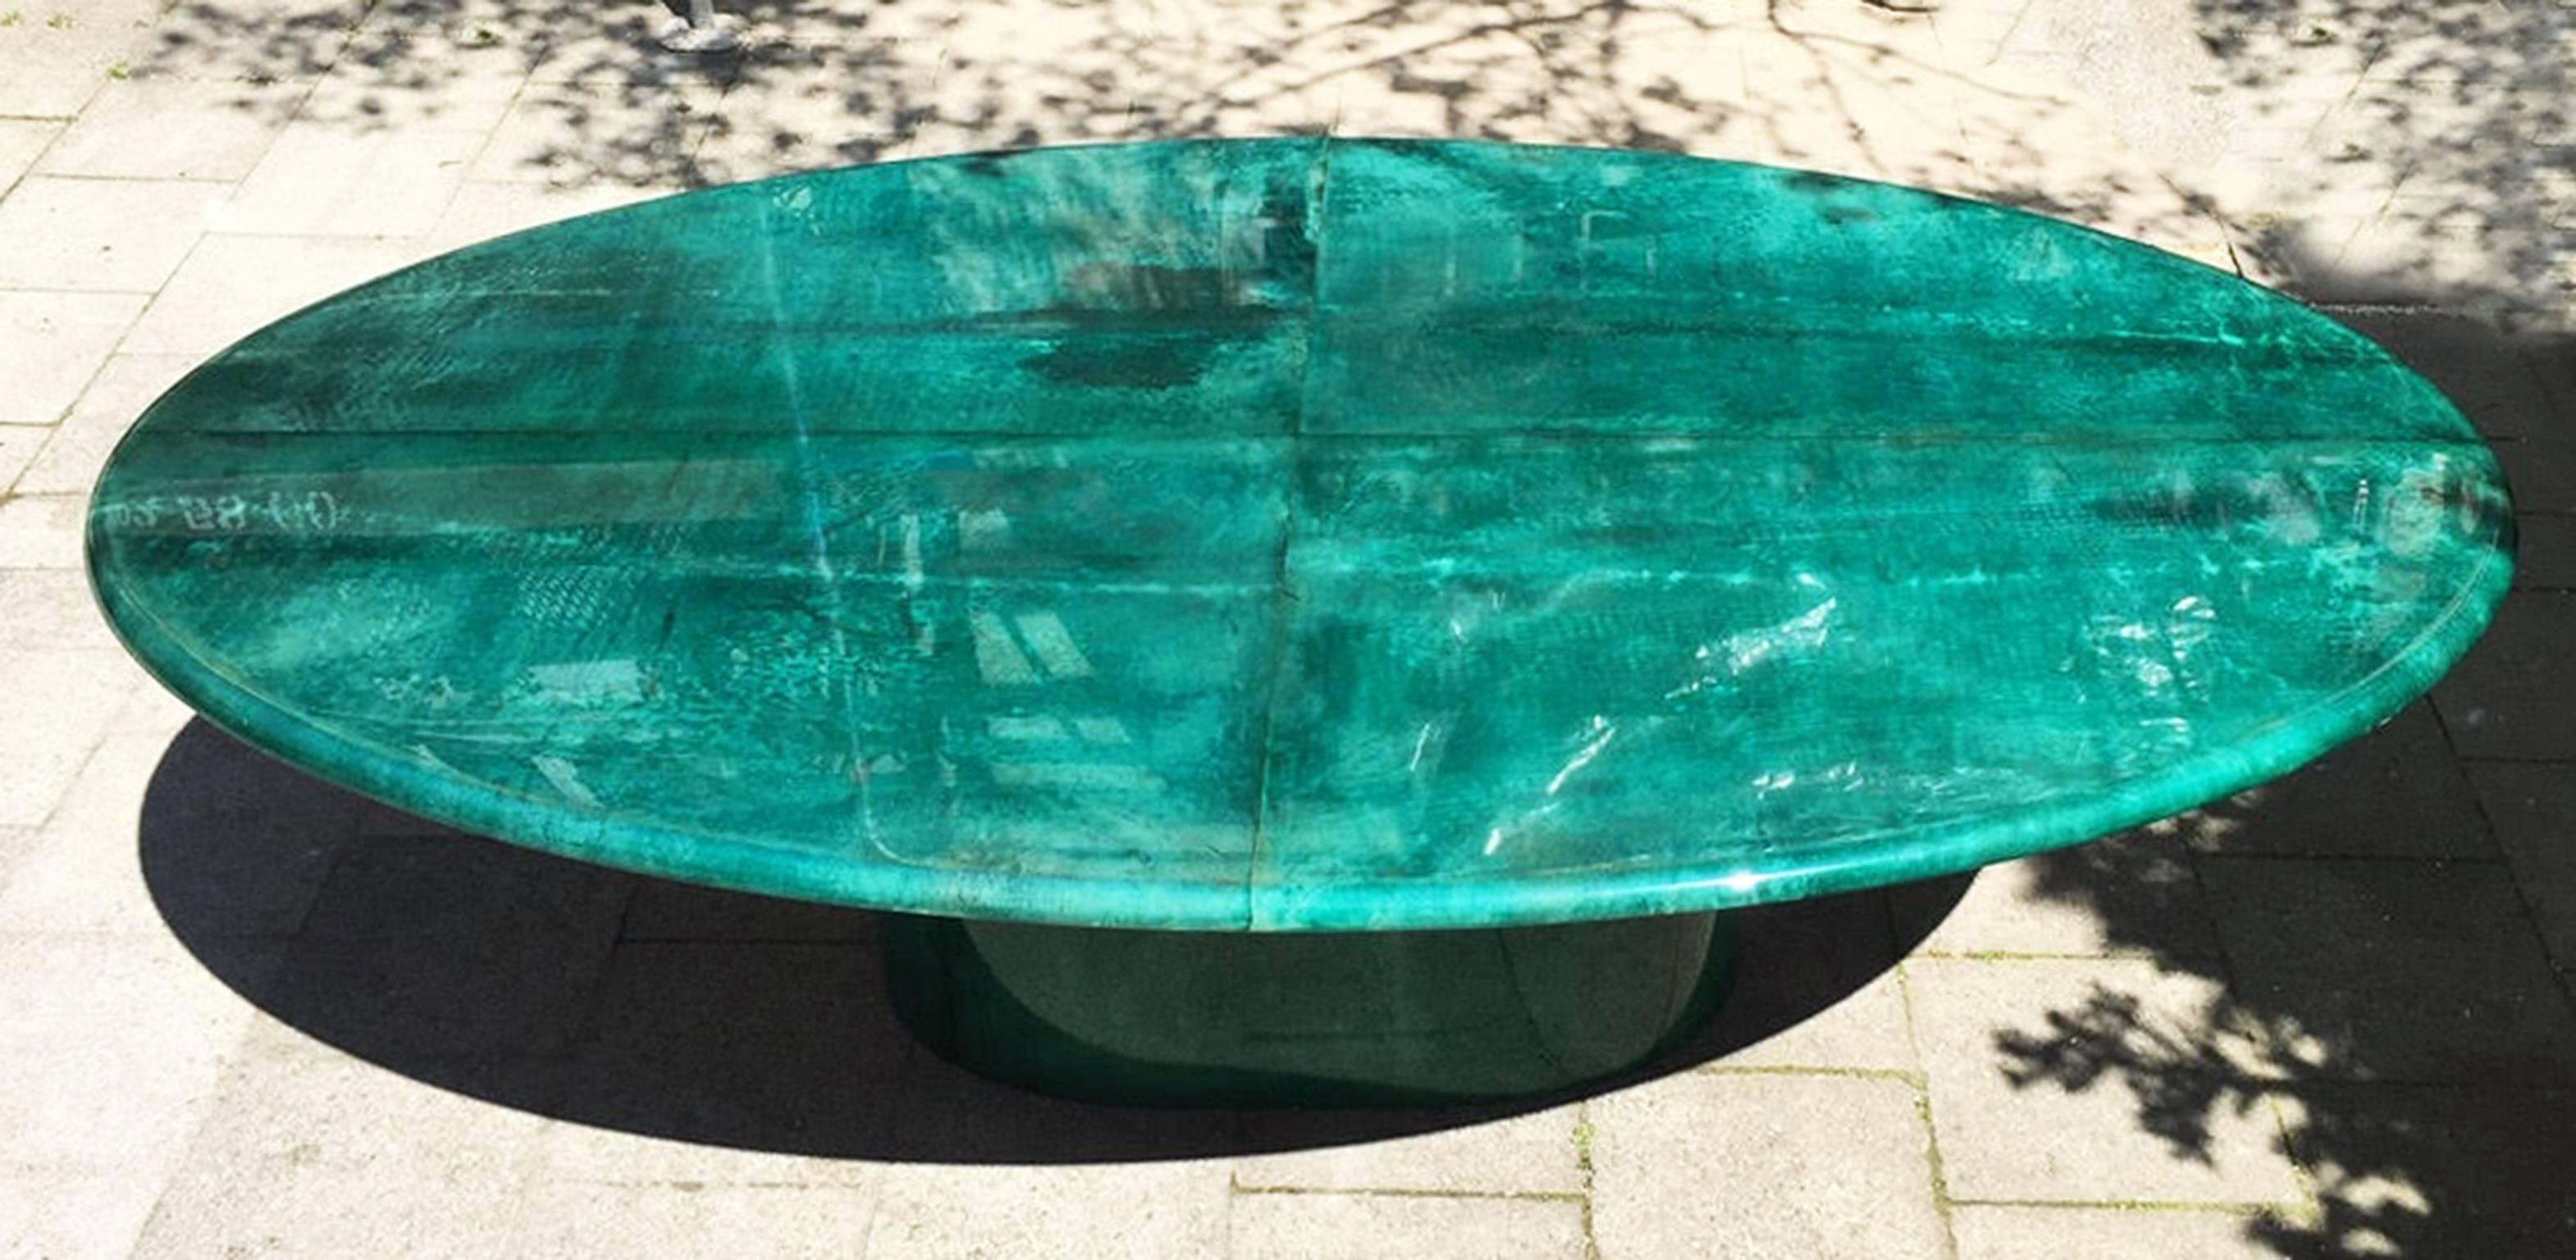 Gorgeous Aldo Tura dining or conference table in deep green goatskin in excellent condition, Italy, 1970s.
Measures: 220 x 130 x 76 cm.